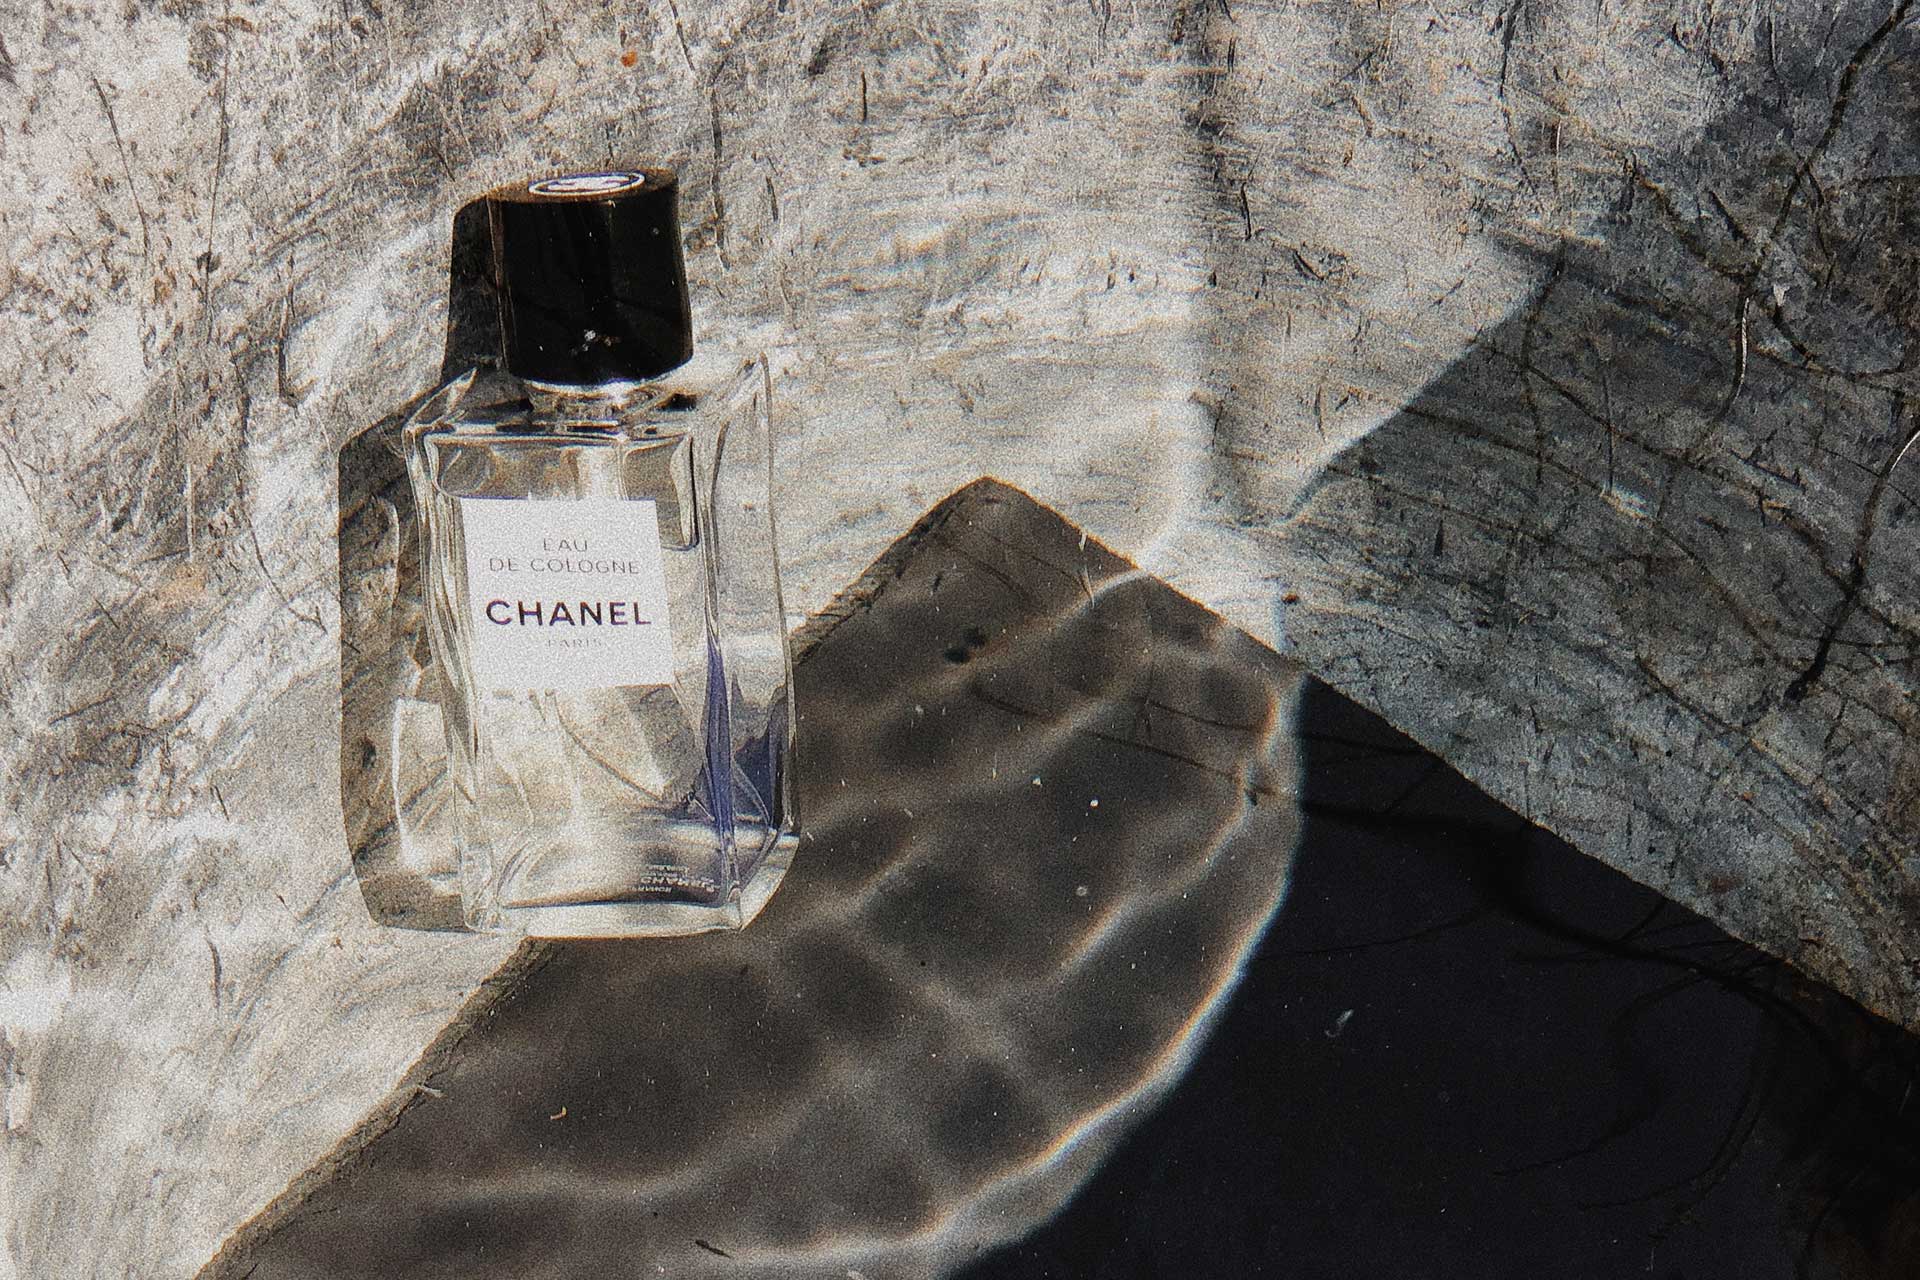 Eau de Cologne, Chanel. The oldest and most reproduced scent